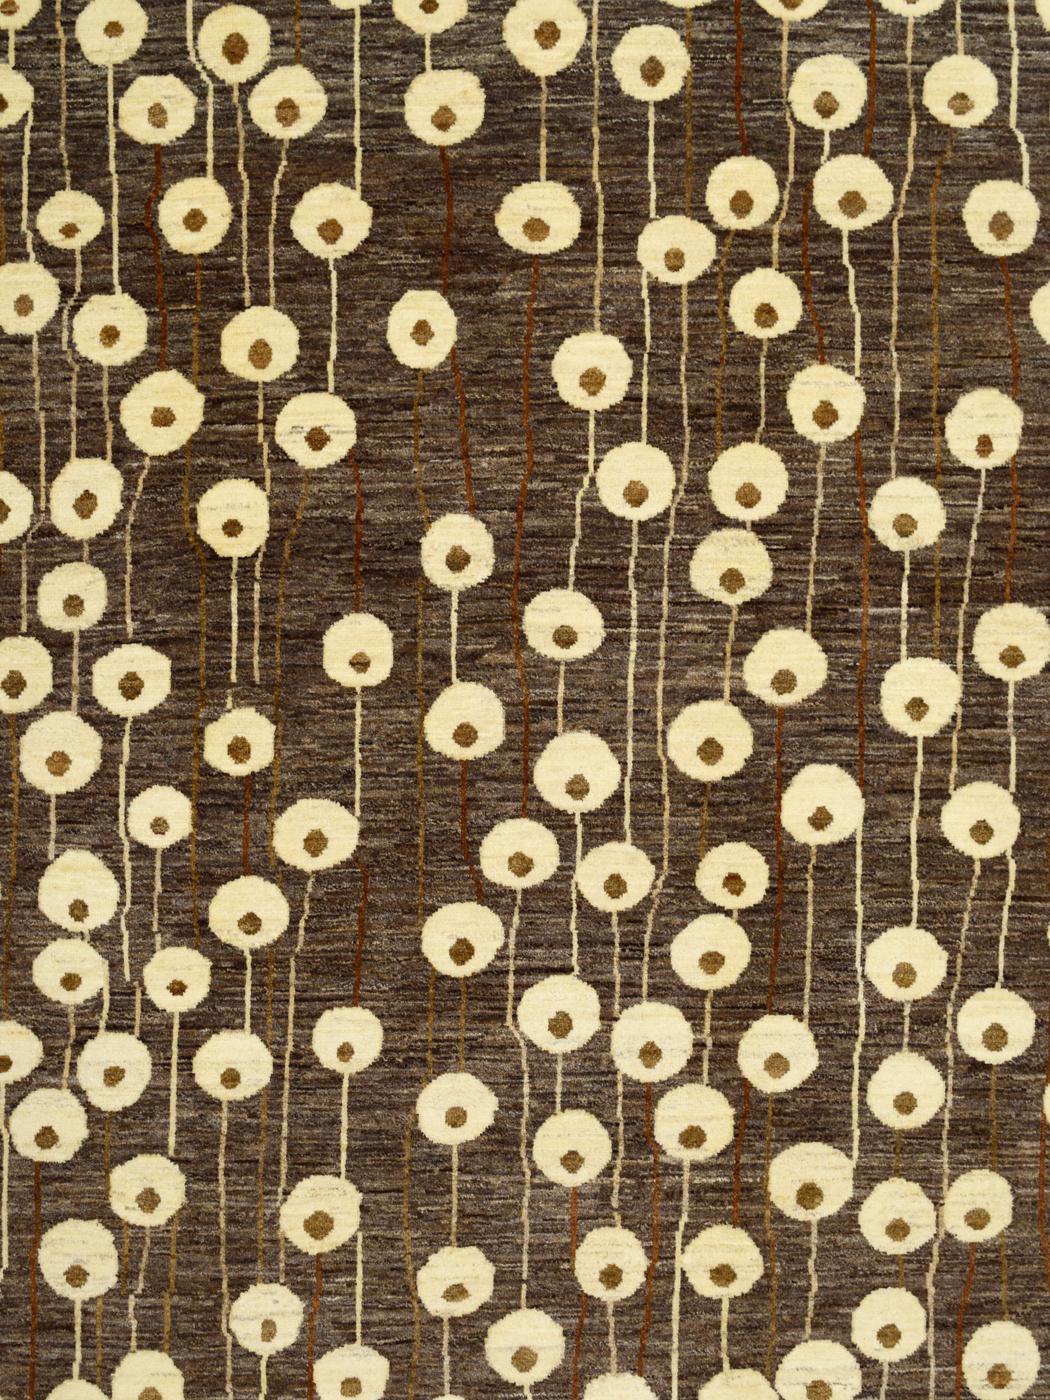 Featuring harmonious shades of neutral brown, cream, and taupe wool, Poppies from the Orley Shabahang Art Deco collection consists of a hand-knotted pure wool pile, cotton warp, and woolen weft. Measuring 6’ x 8’10”, this carpet showcases a field of